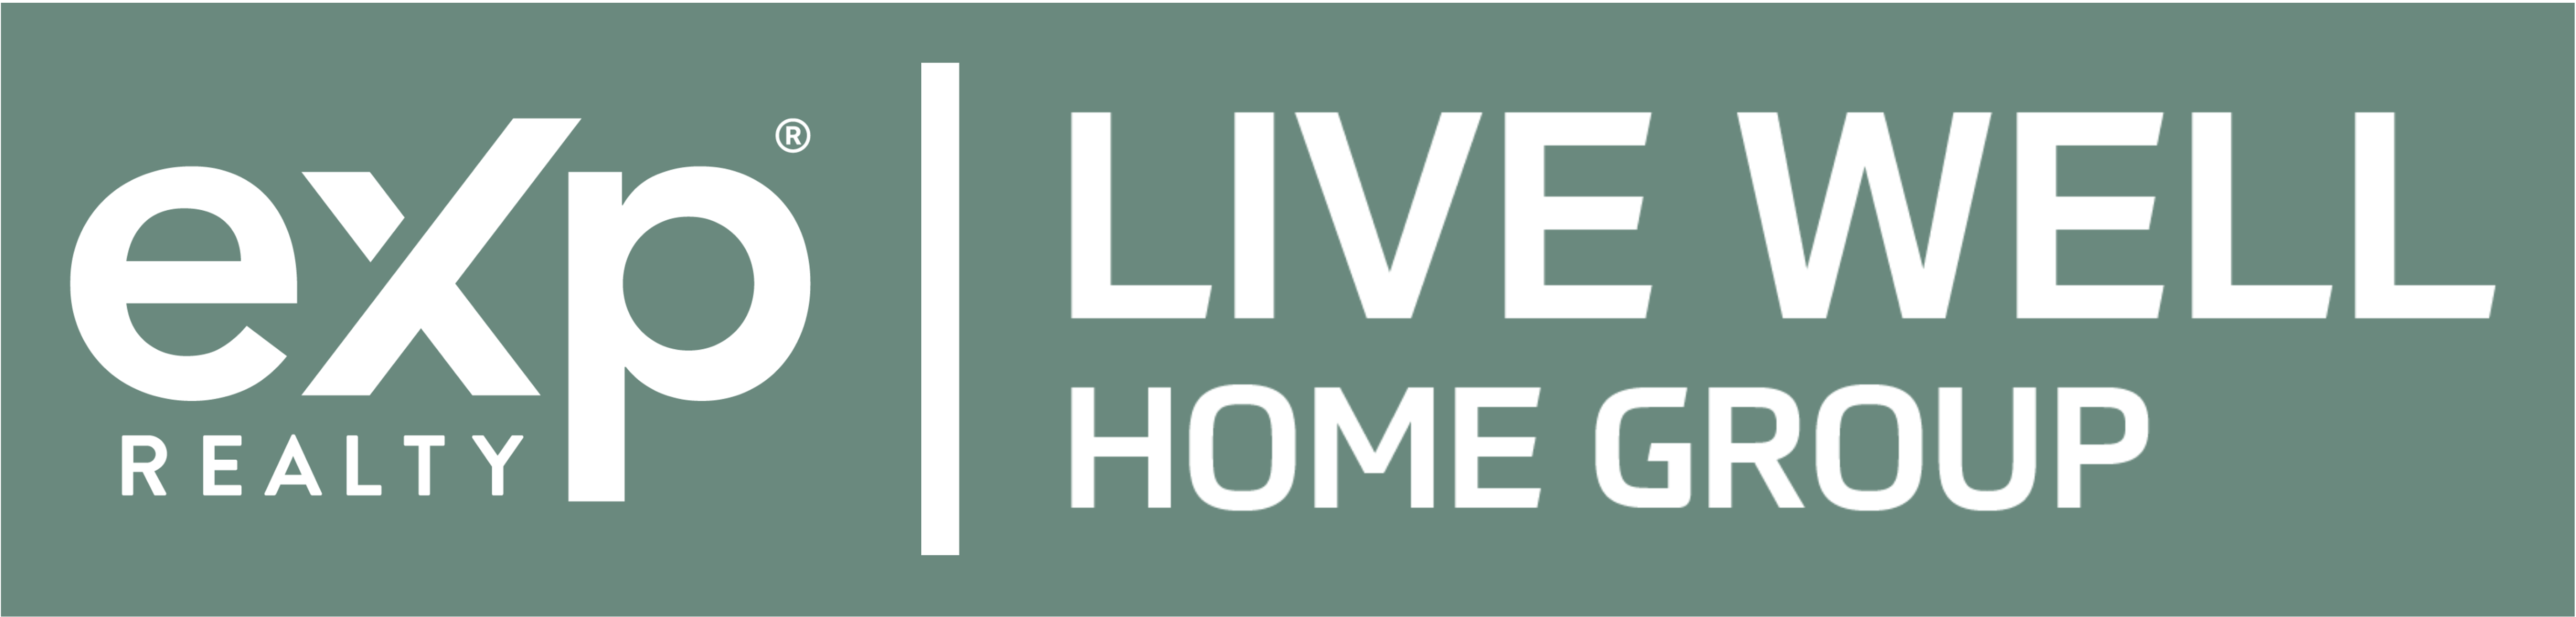 Live Well Home Group